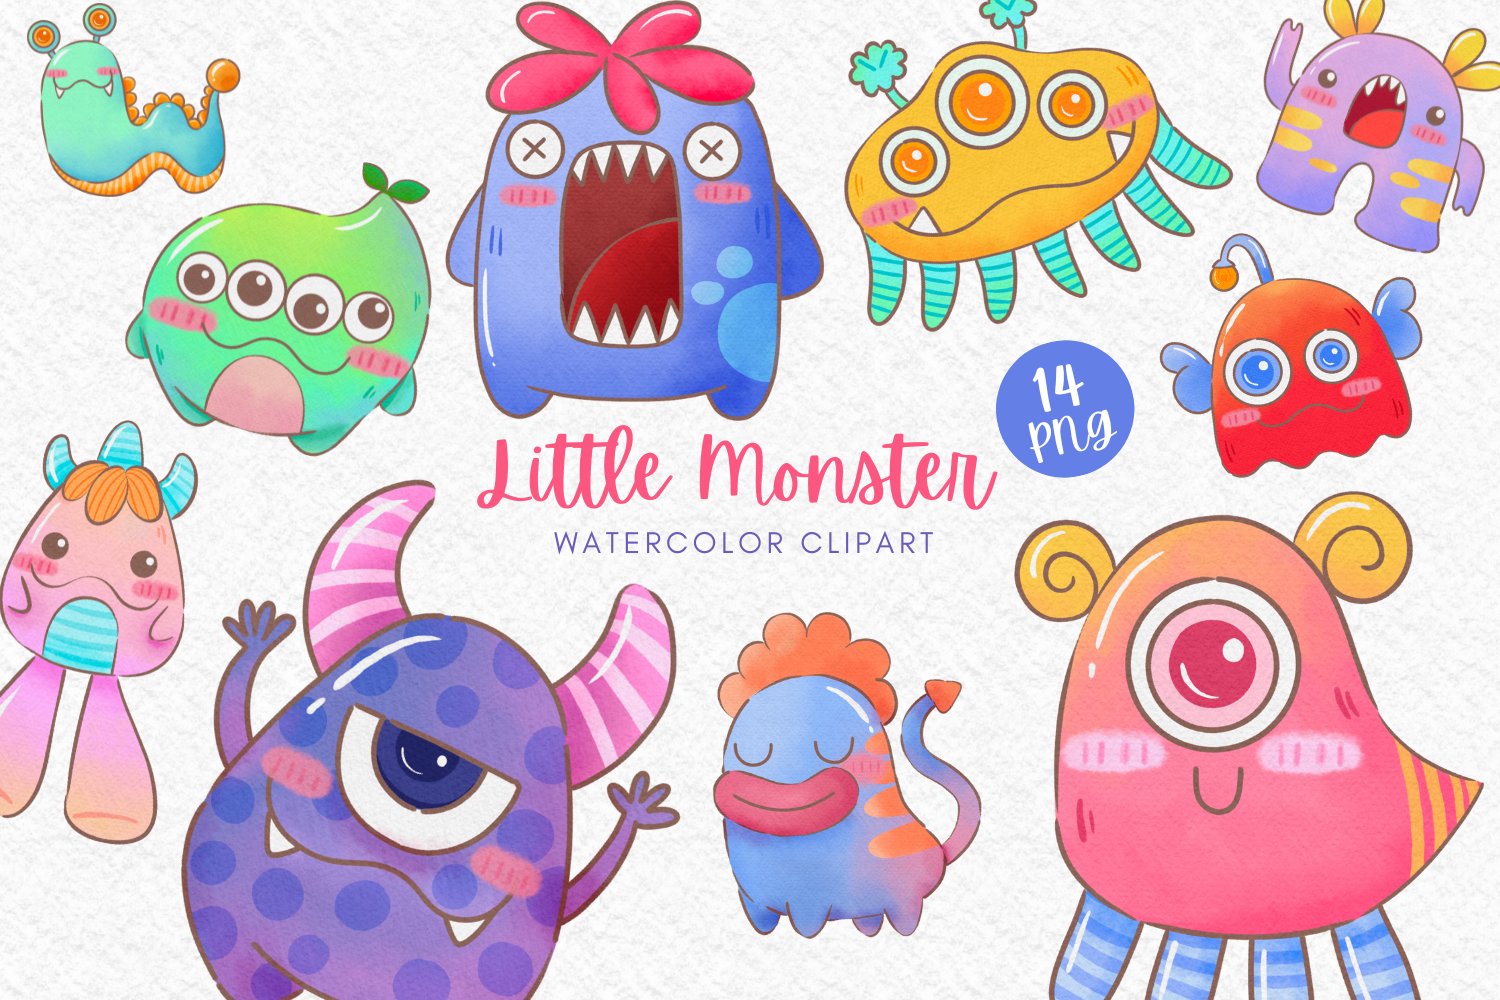 Little Monster watercolor clipart cover image.